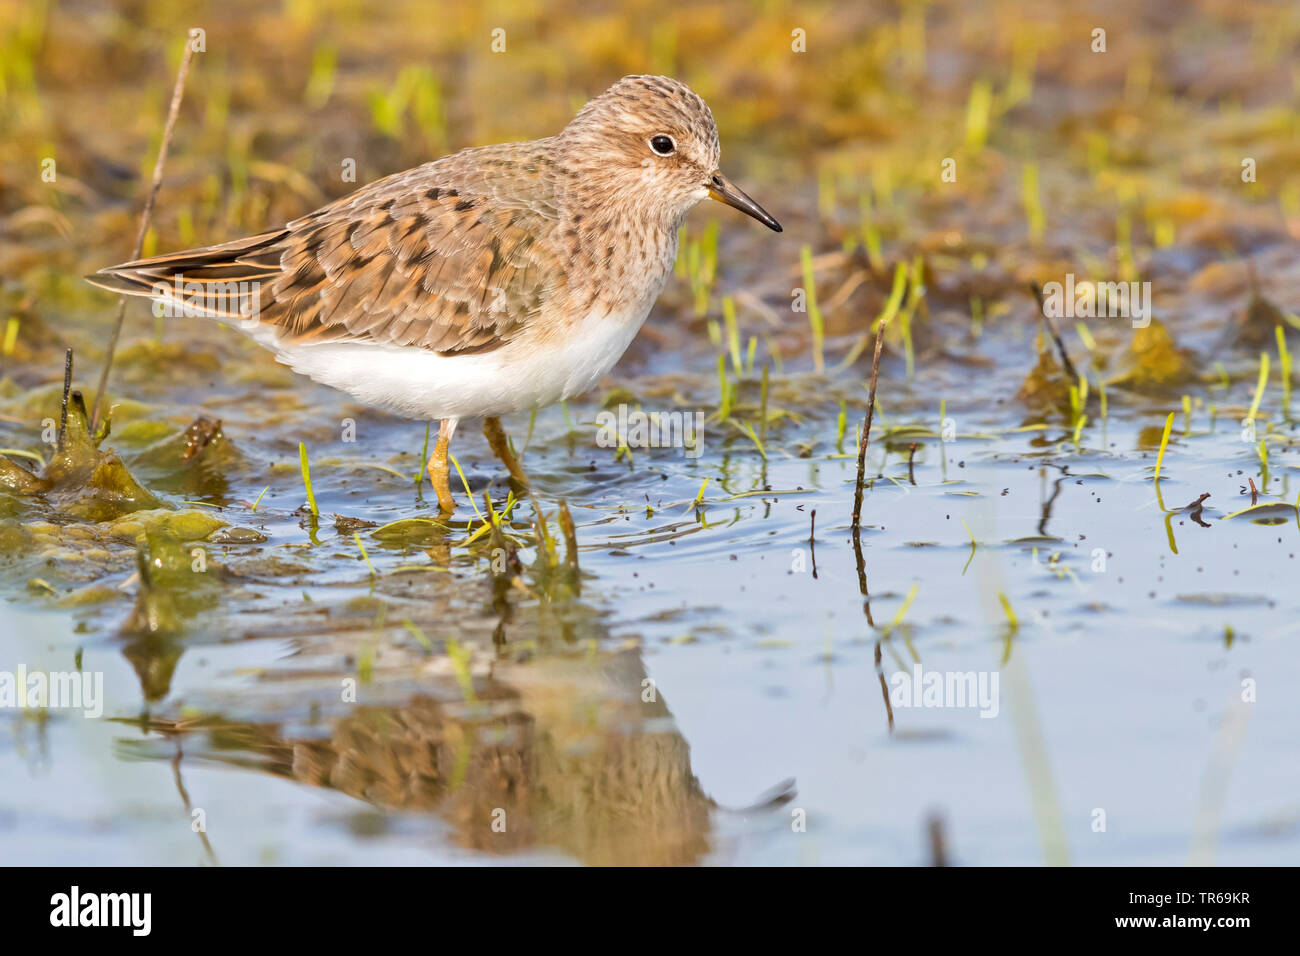 Temminck's stint (Calidris temminckii), searching for food in water, Greece, Lesbos Stock Photo